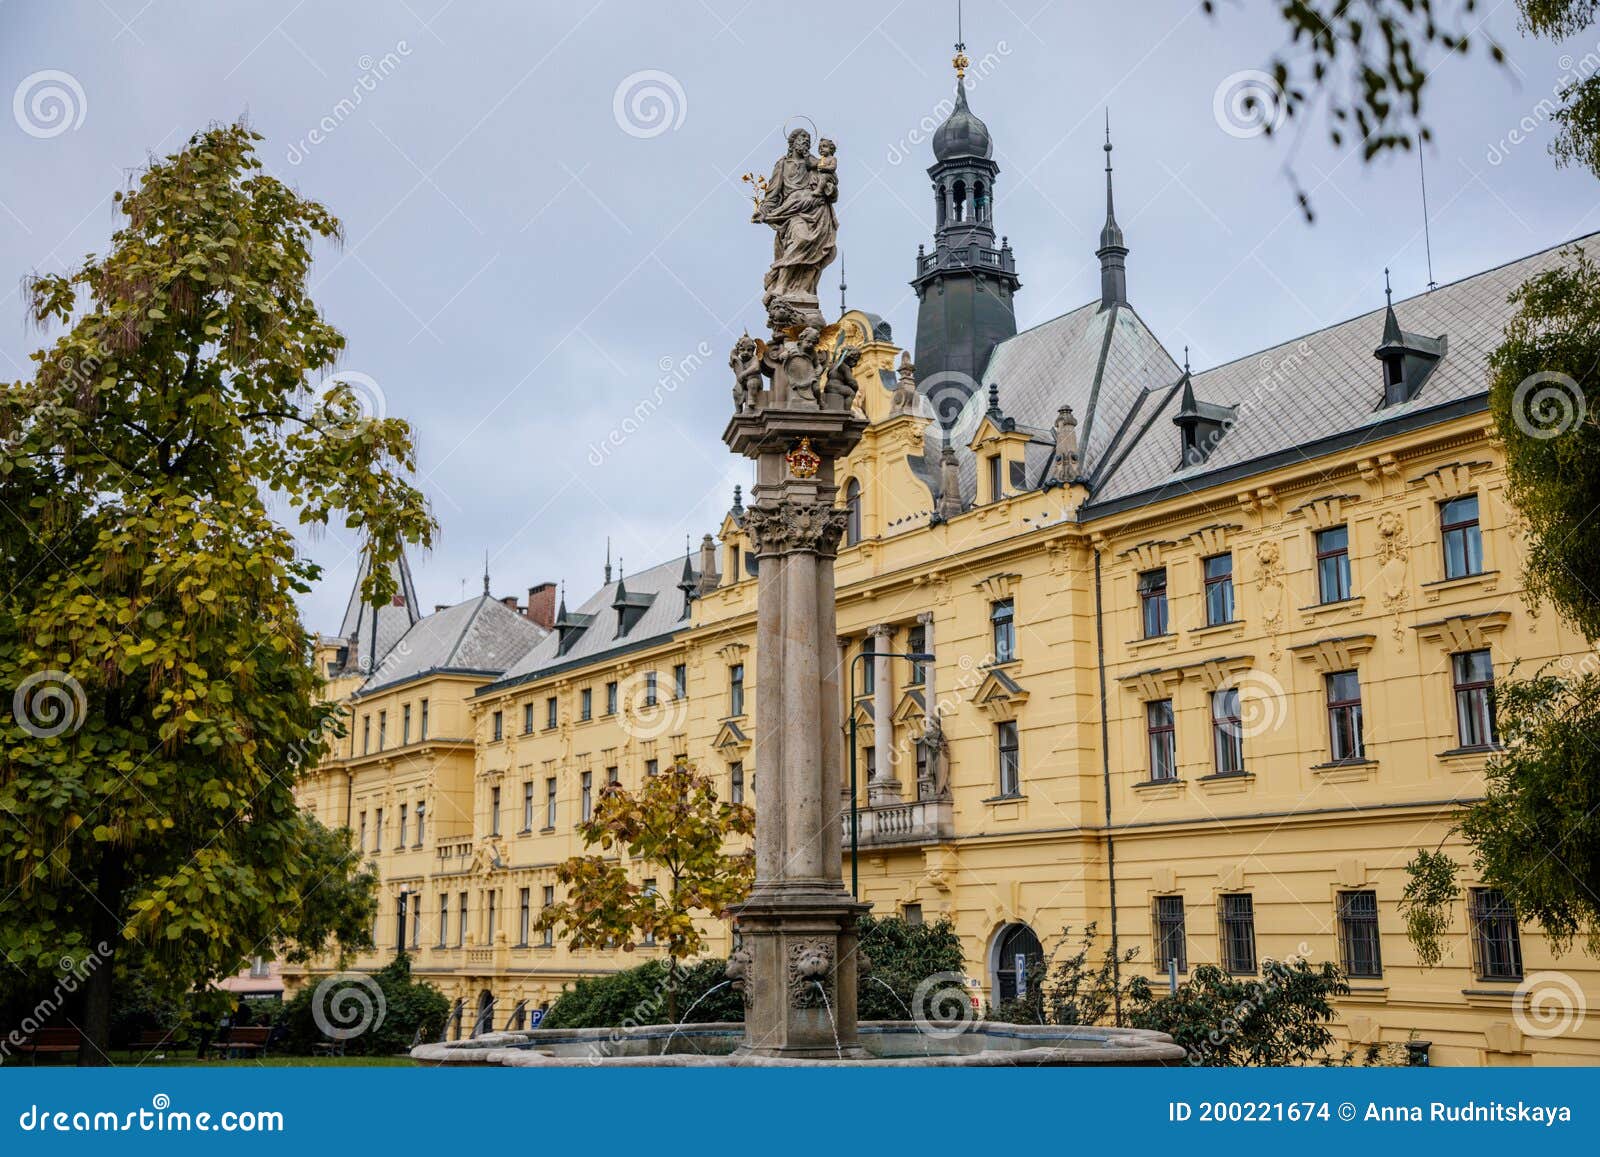 fountain with a statue of st. josefa at charles square near the renaissance building of municipal court and new town hall in the